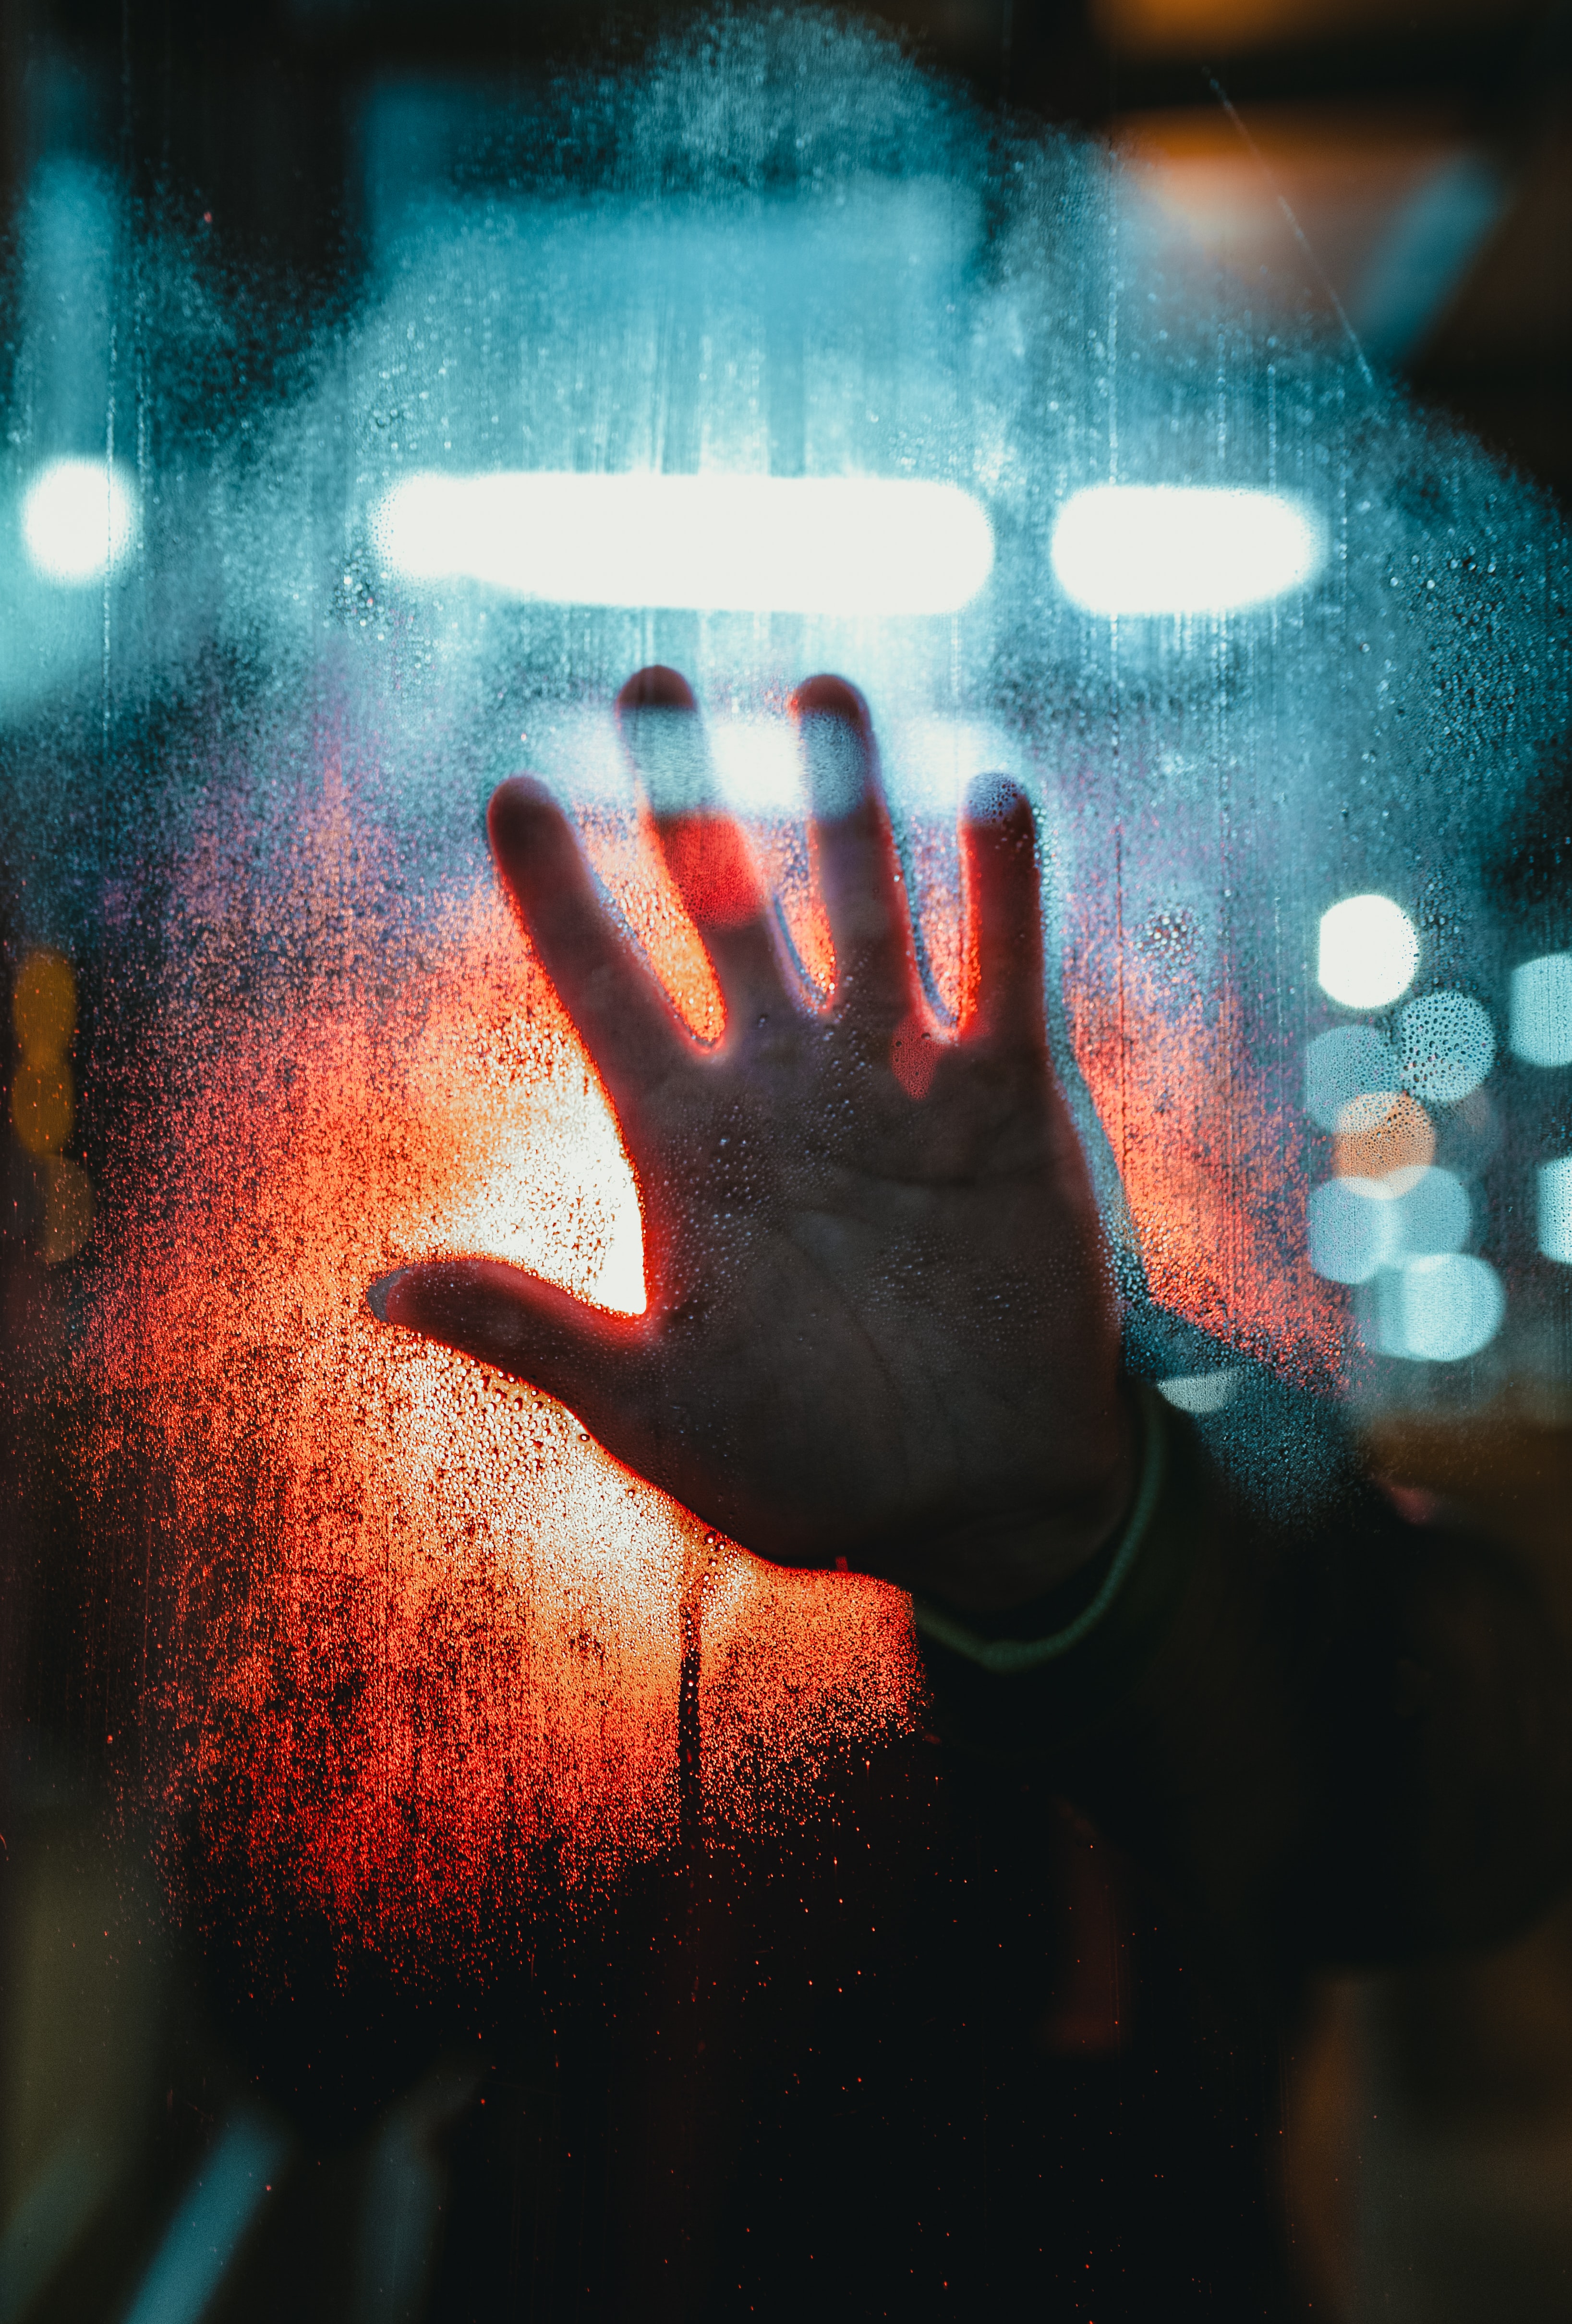 A Hand On Wet Glass, With Blue And Red Lights In The Background